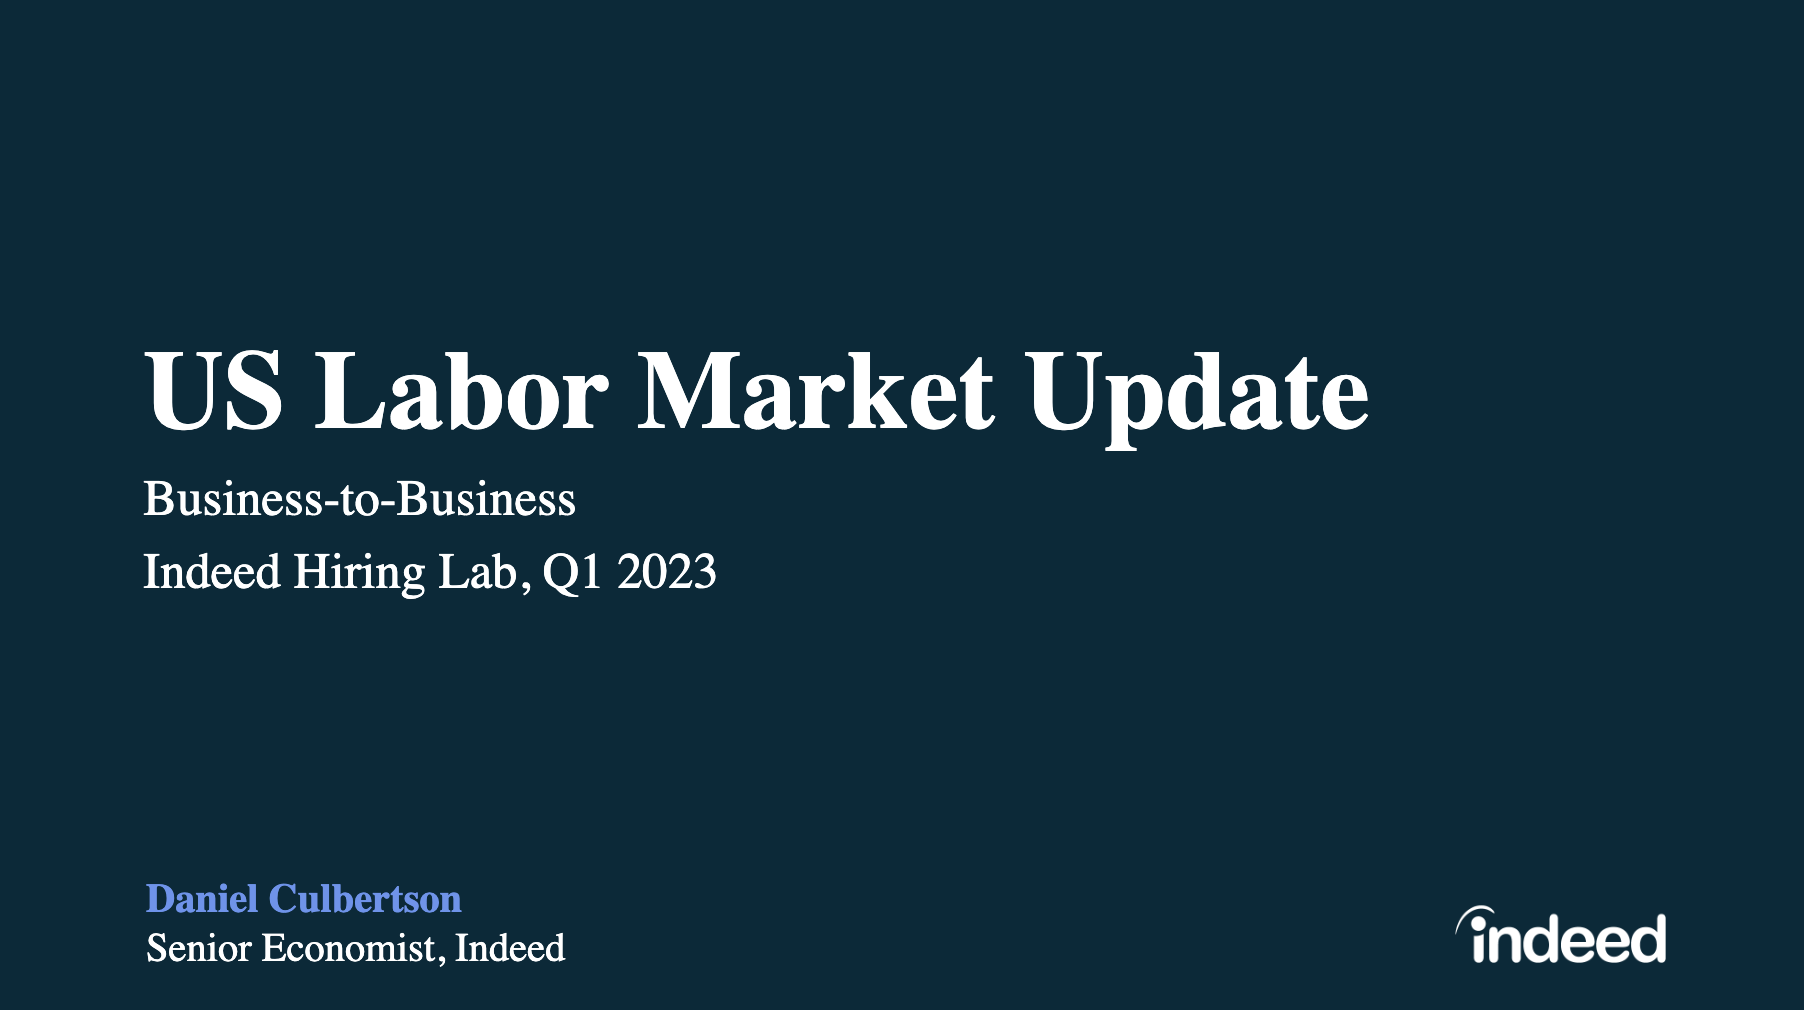 US Business-to-Business Labor Market Update - 2023 Q1